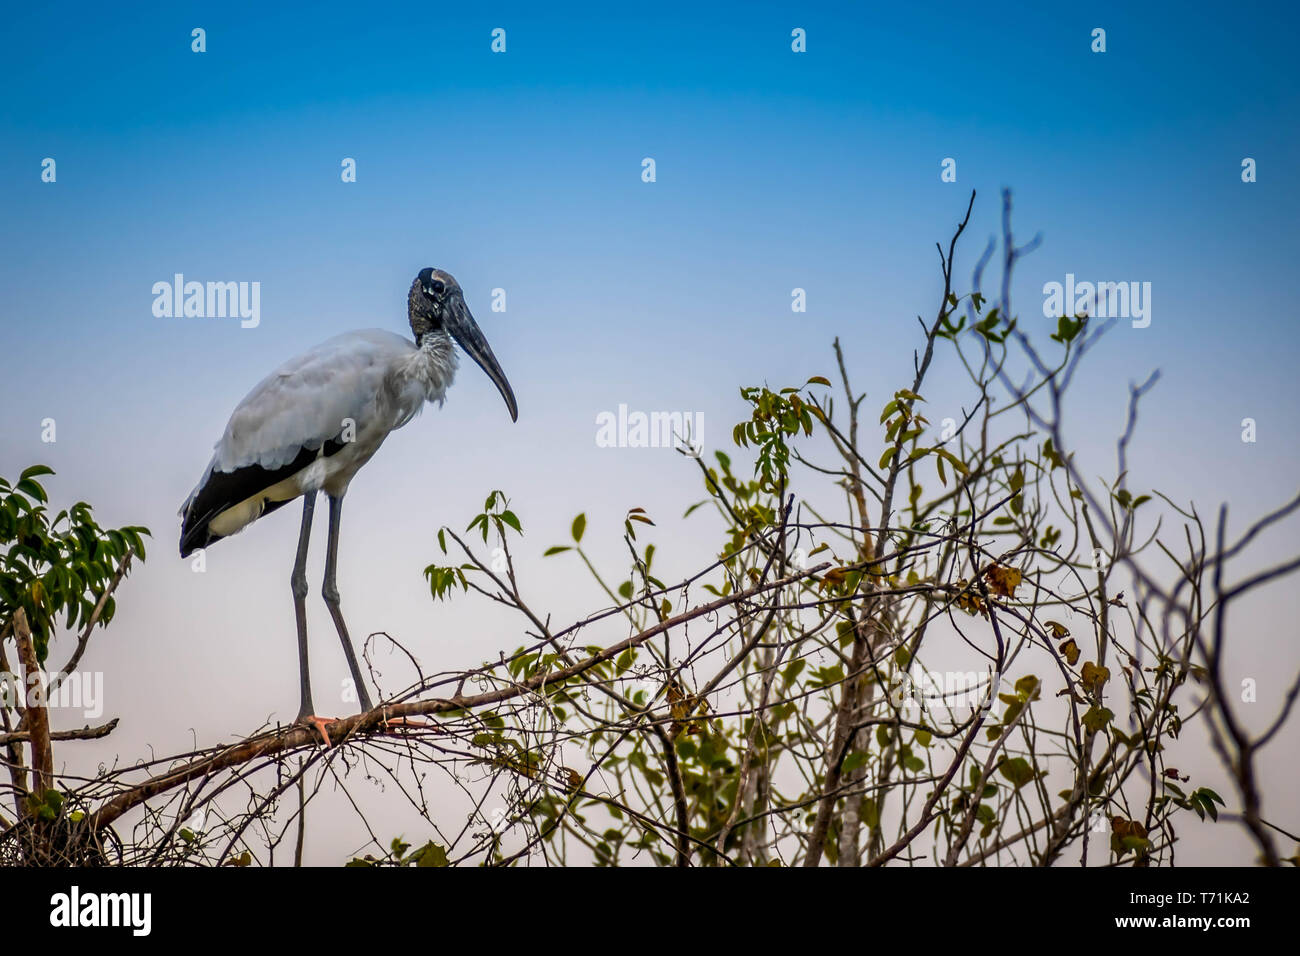 A Black Headed Ibis in Everglades National Park, Florida Stock Photo